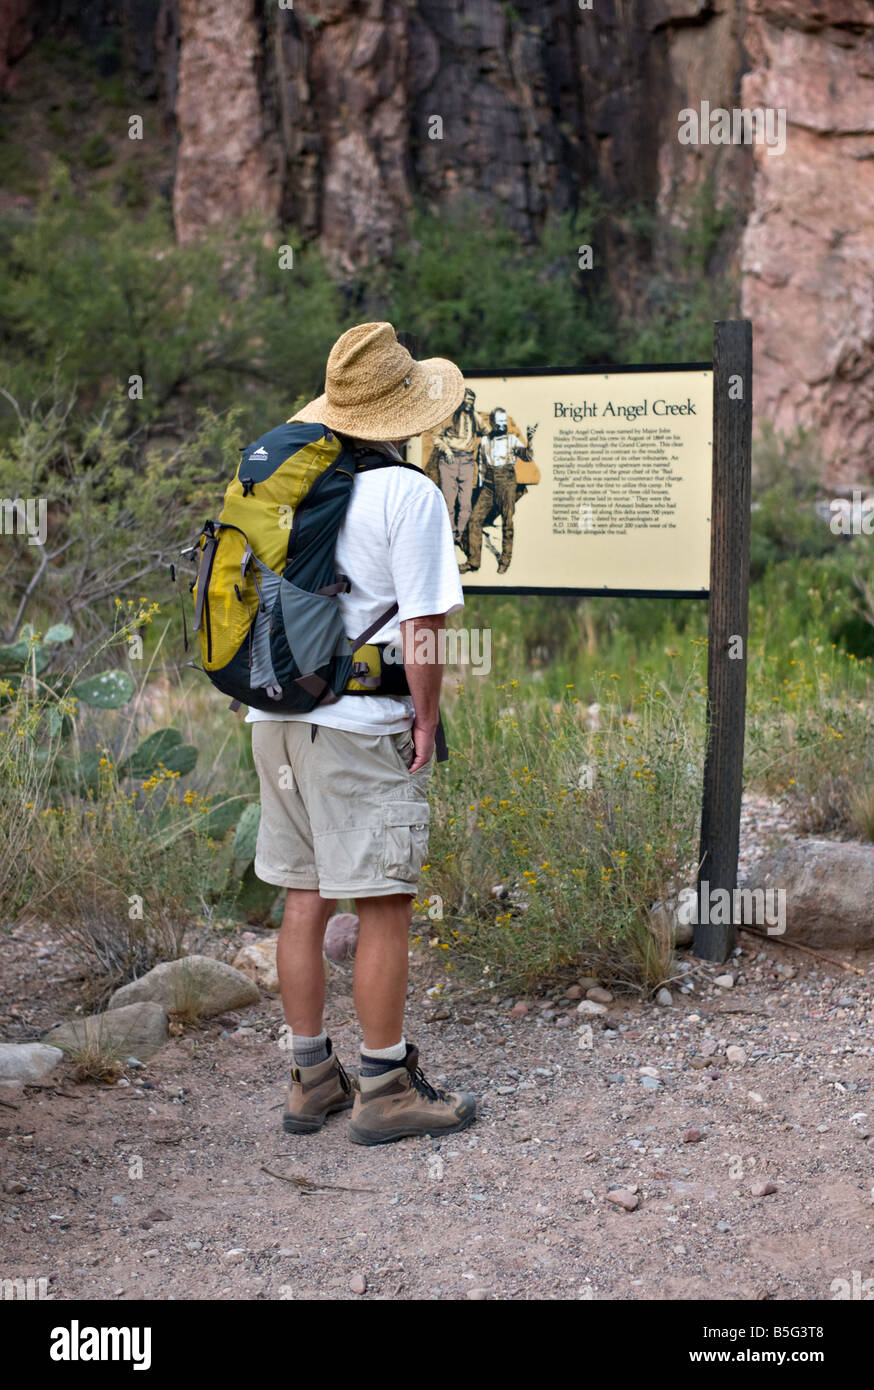 ARIZONA GRAND CANYON Hiker stops to read about Bright Angel Creek on the trail from Phantom Ranch in the Grand Canyon Stock Photo